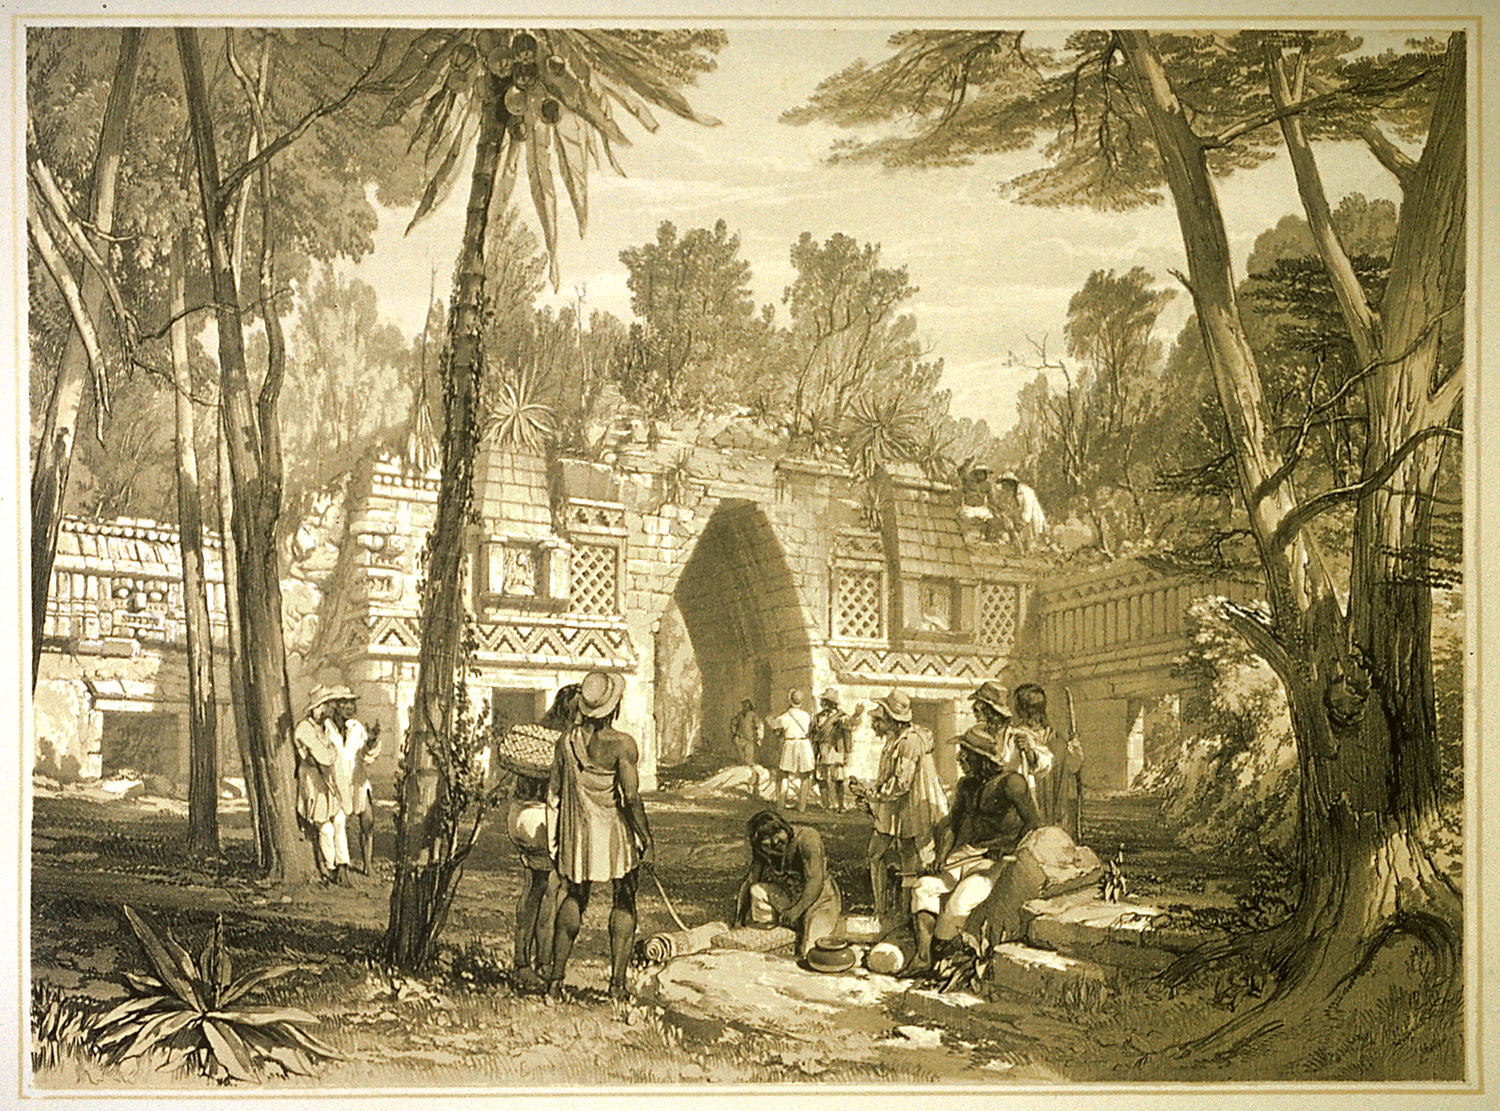   Arch of Labna, from Views of Ancient Monuments in Central America, Chiapas and Yucatan 1844  